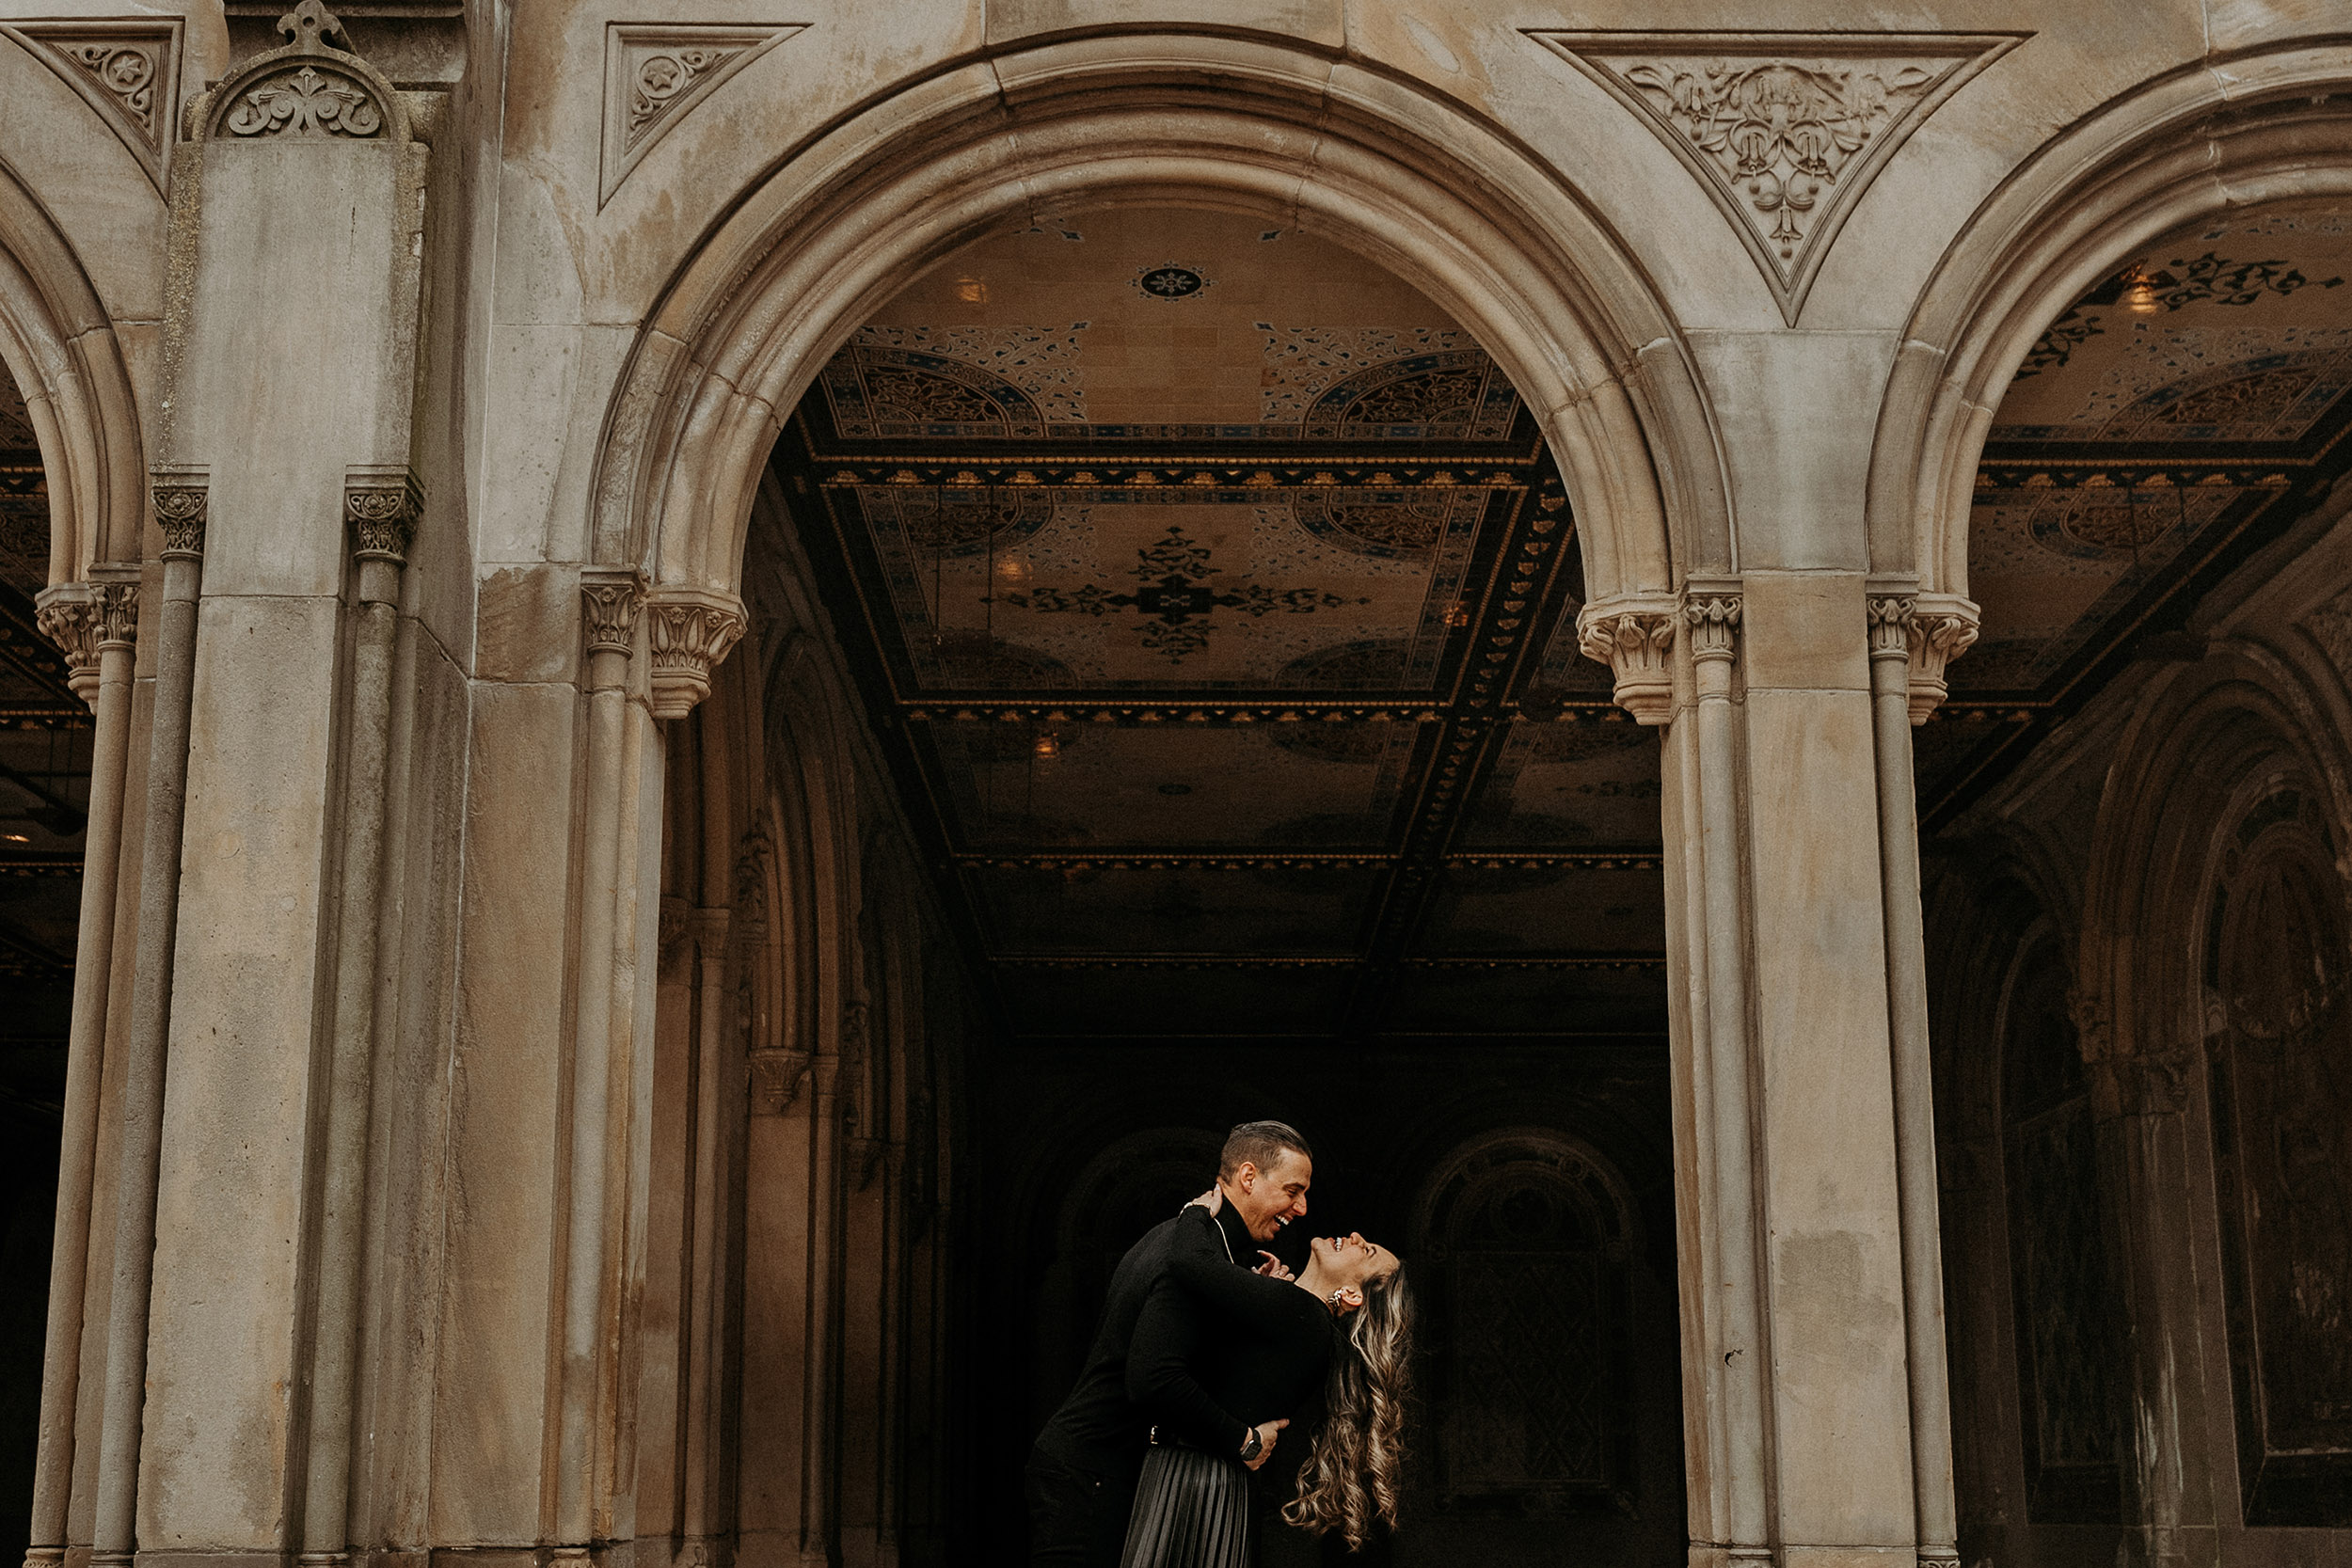 Elegant and stylish couples photography in Central Park. New York City photoshoot.